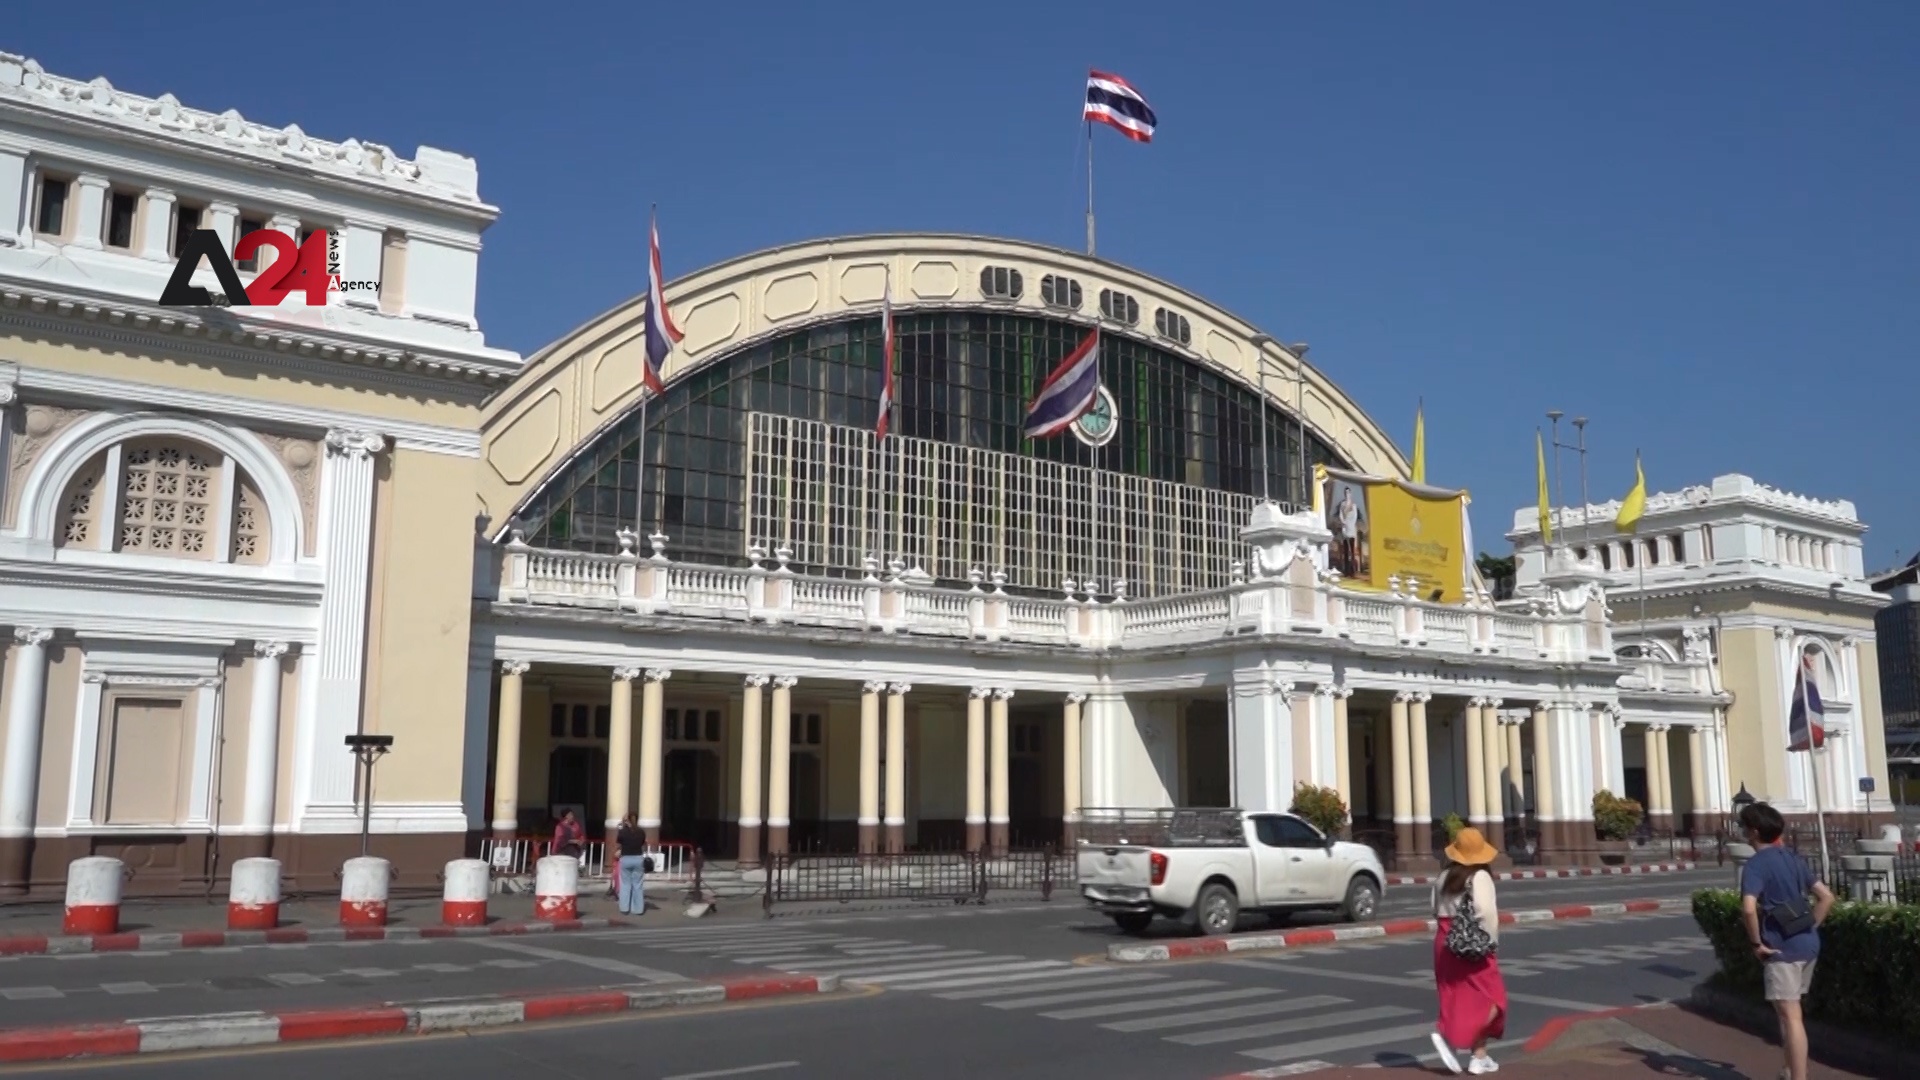 Thailand – Reactions to Thailand’s one of the oldest railway station being closed